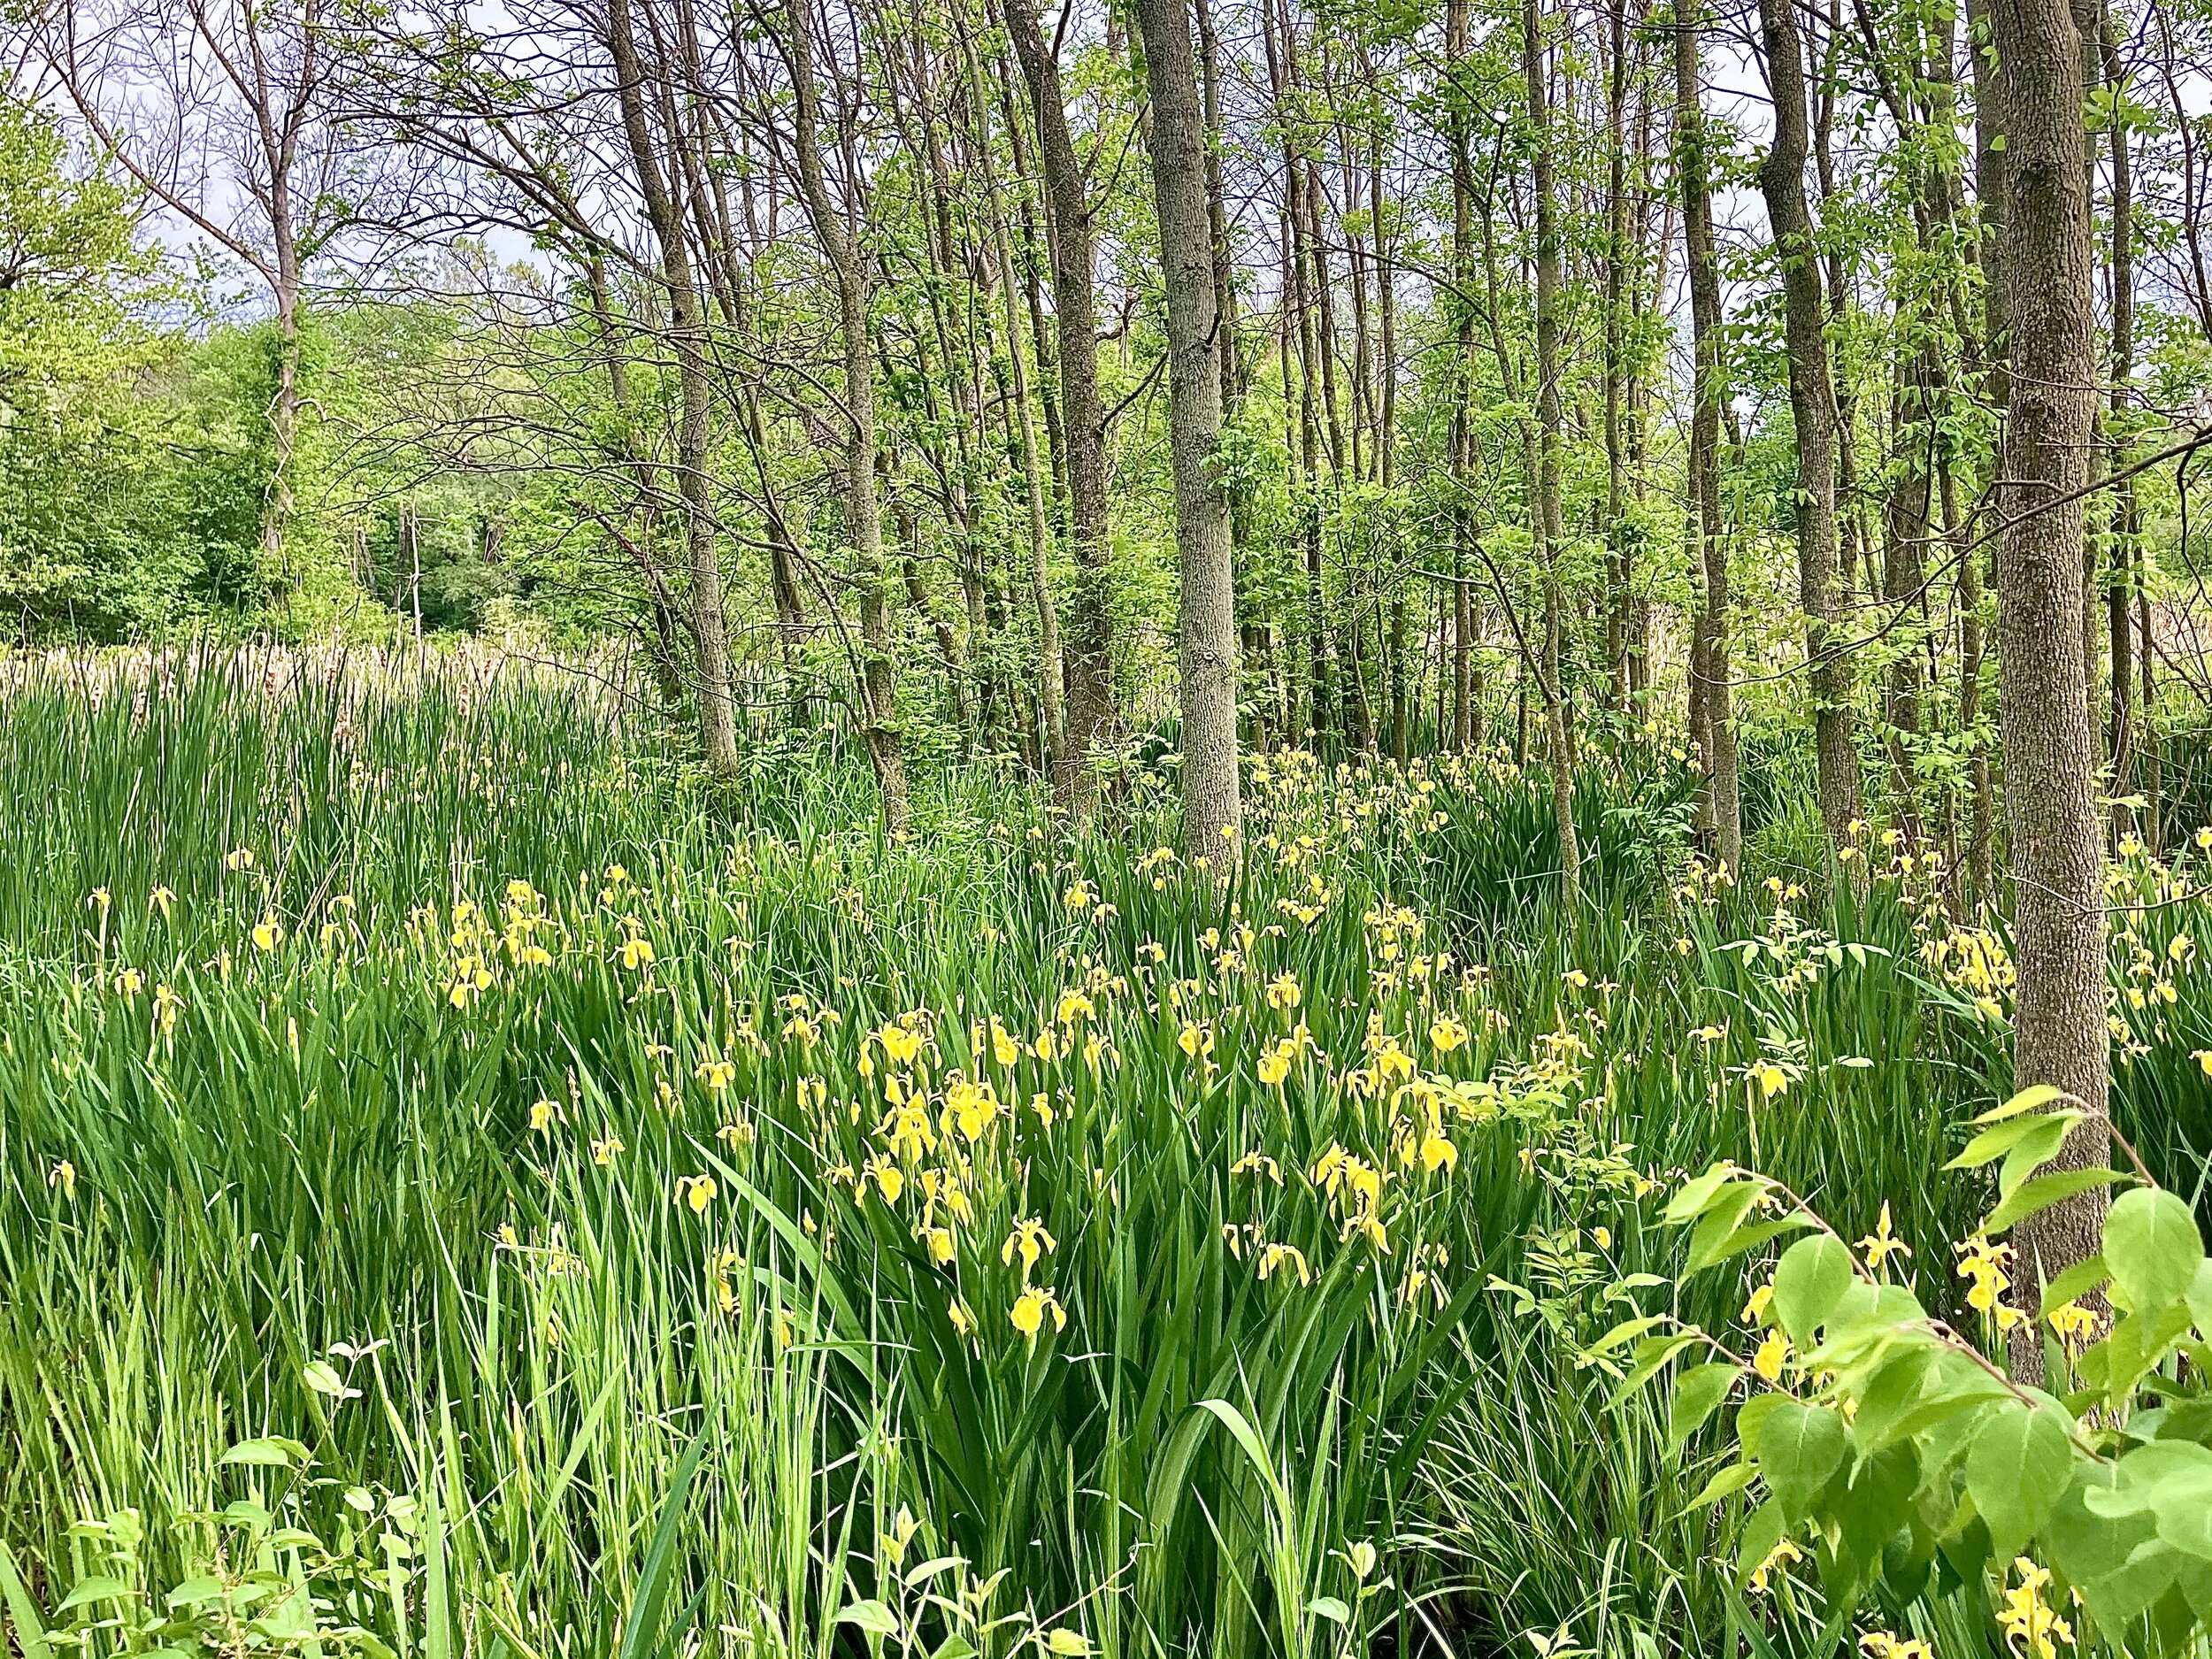 Bright yellow swamp irises cover the ground with dark green leafy trees behind